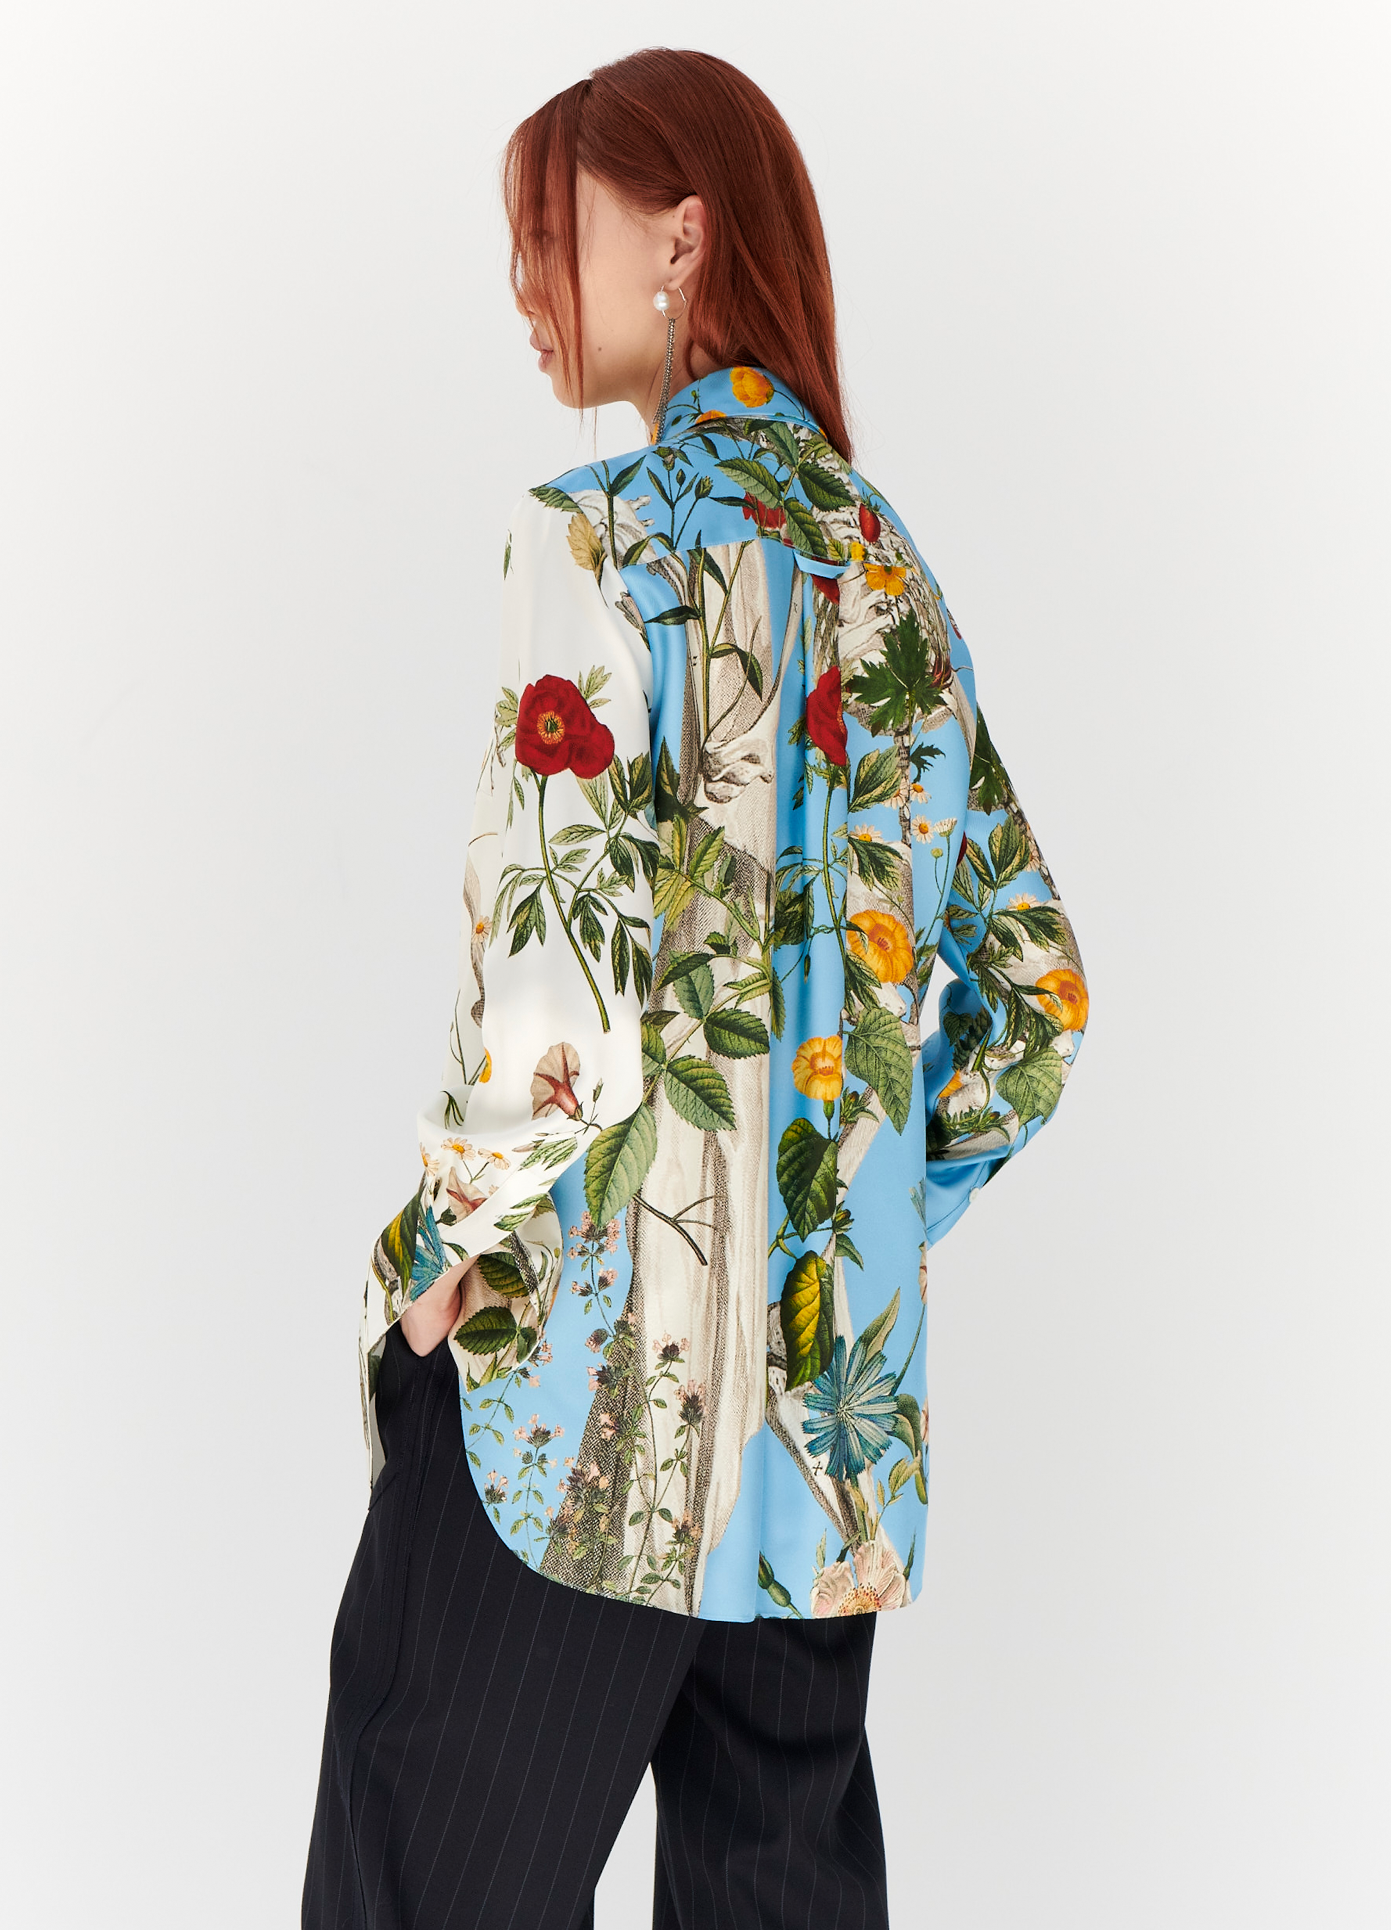 MONSE Floral Skeleton Combo Print Blouse in Blue and Ivory Multi on model back side view